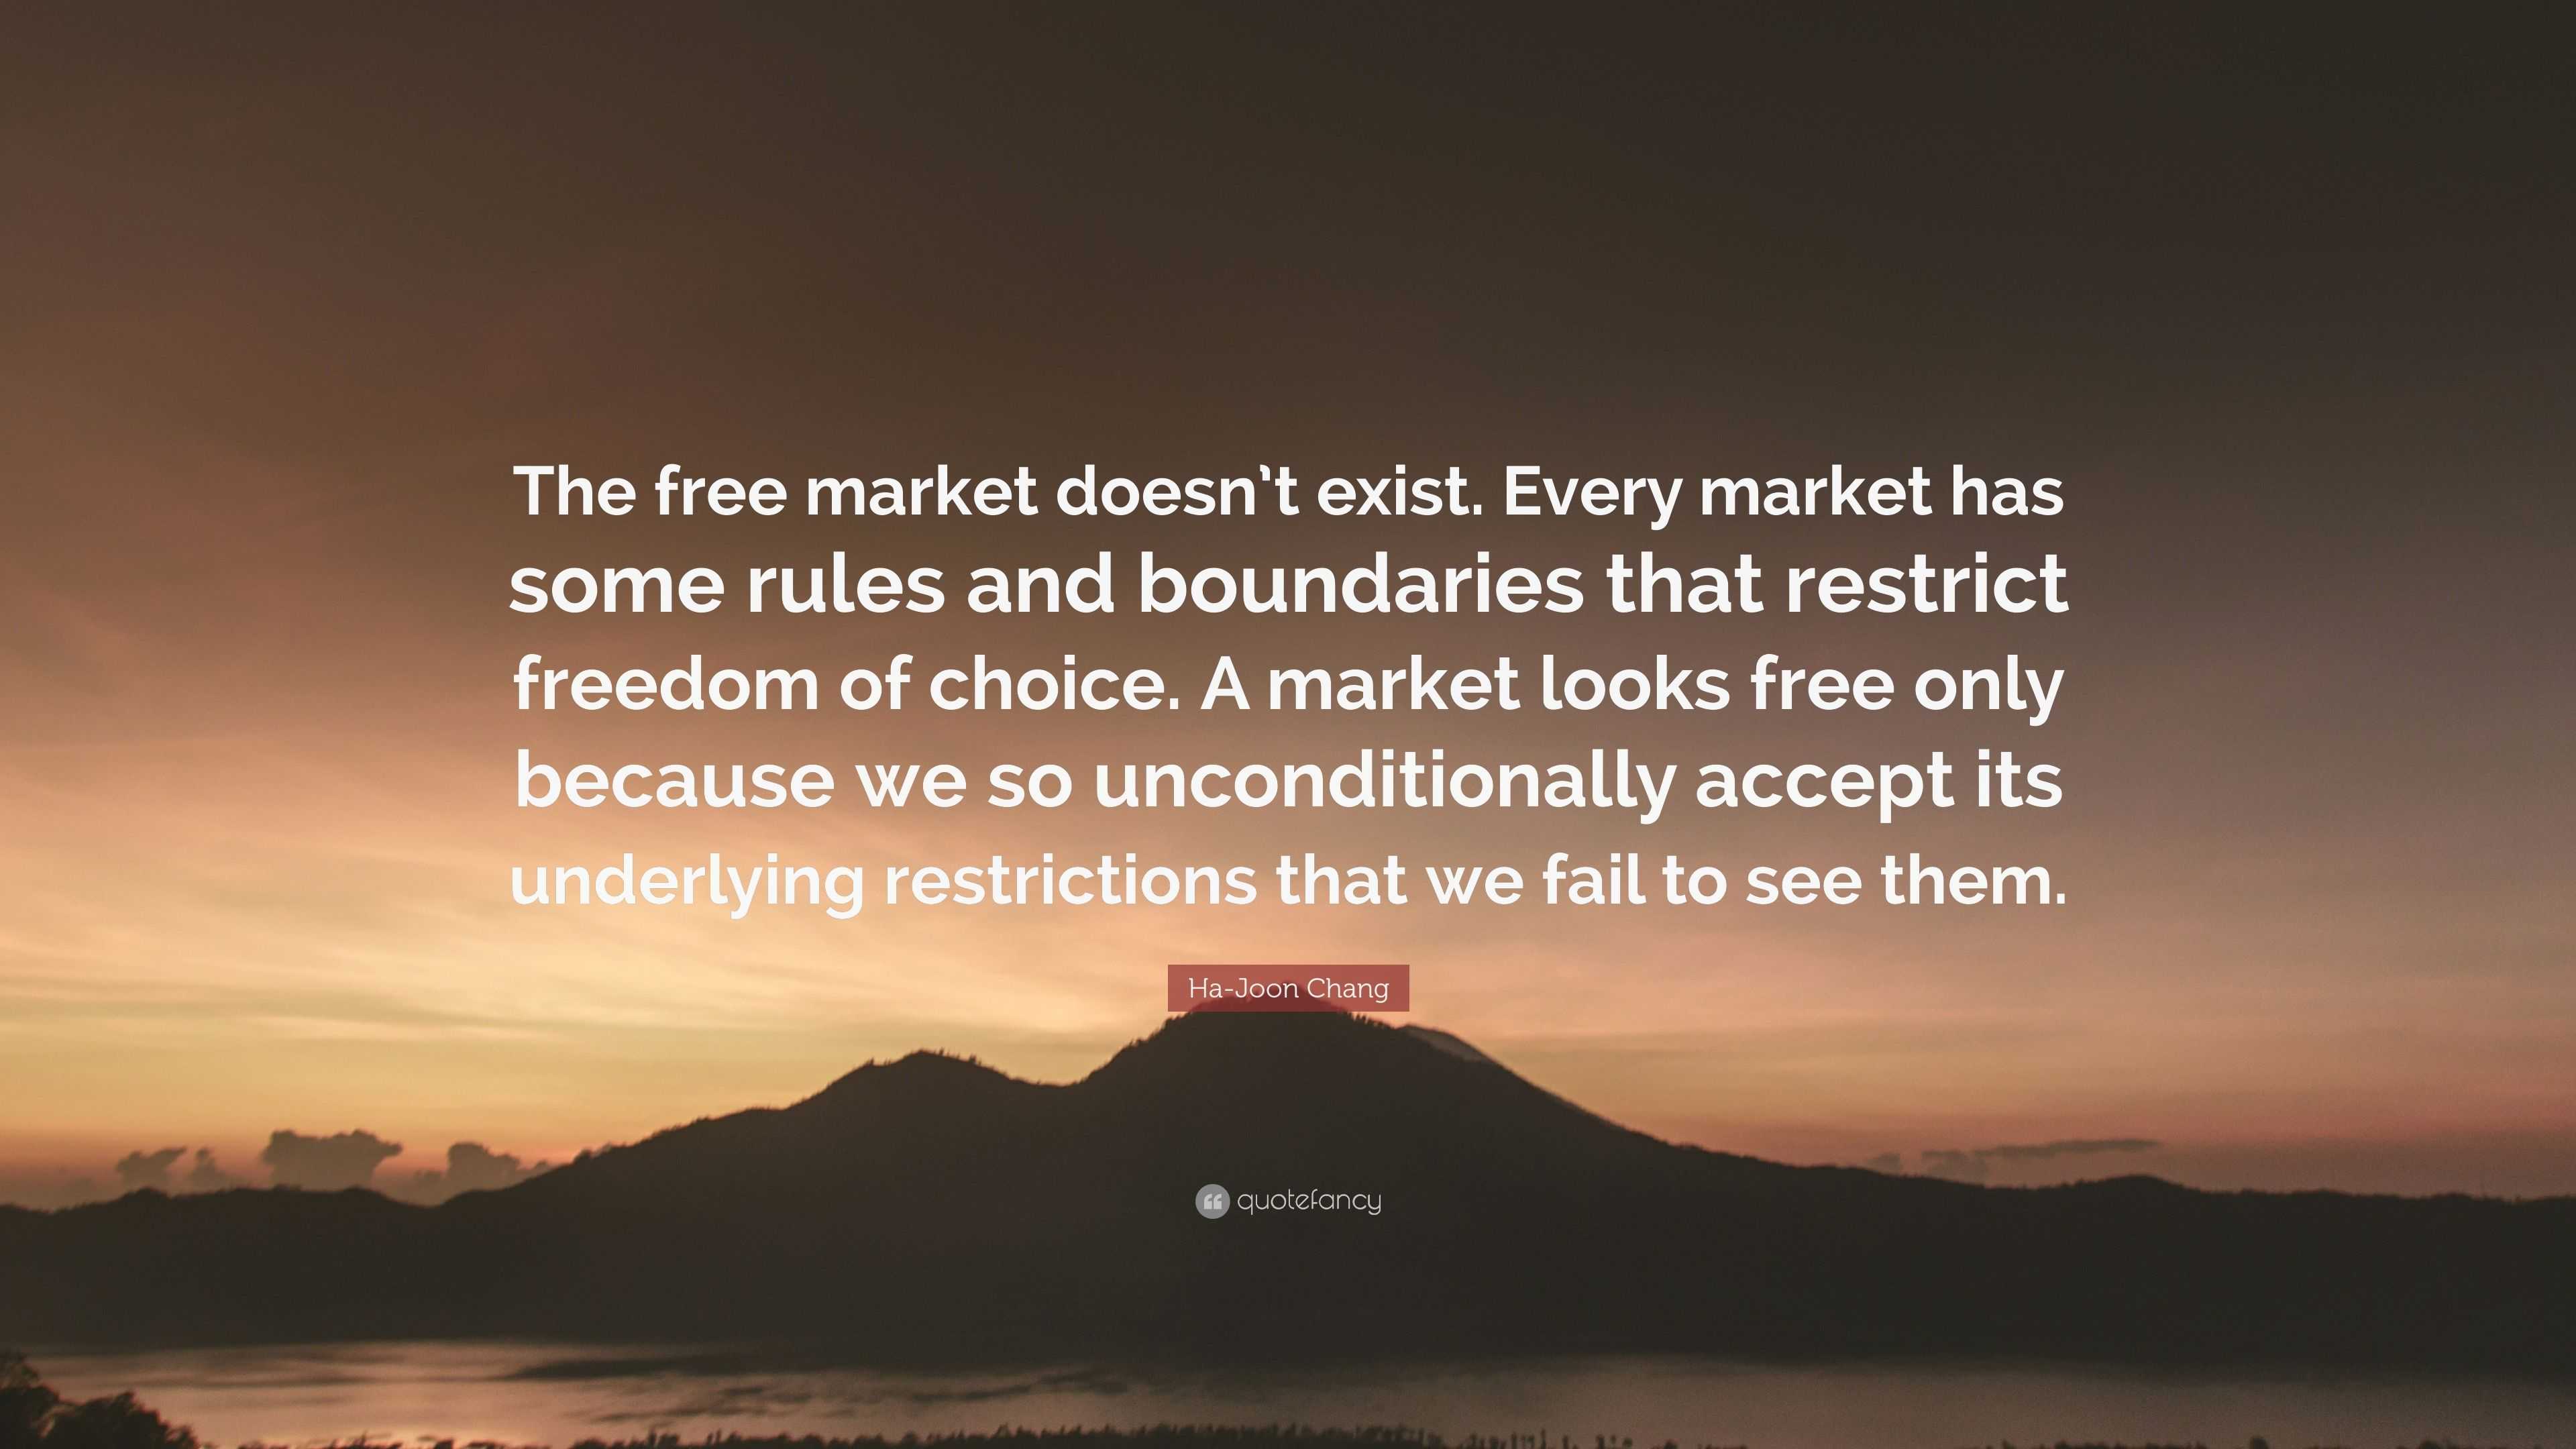 Ha-Joon Chang Quote: “The free market doesn't exist. Every market